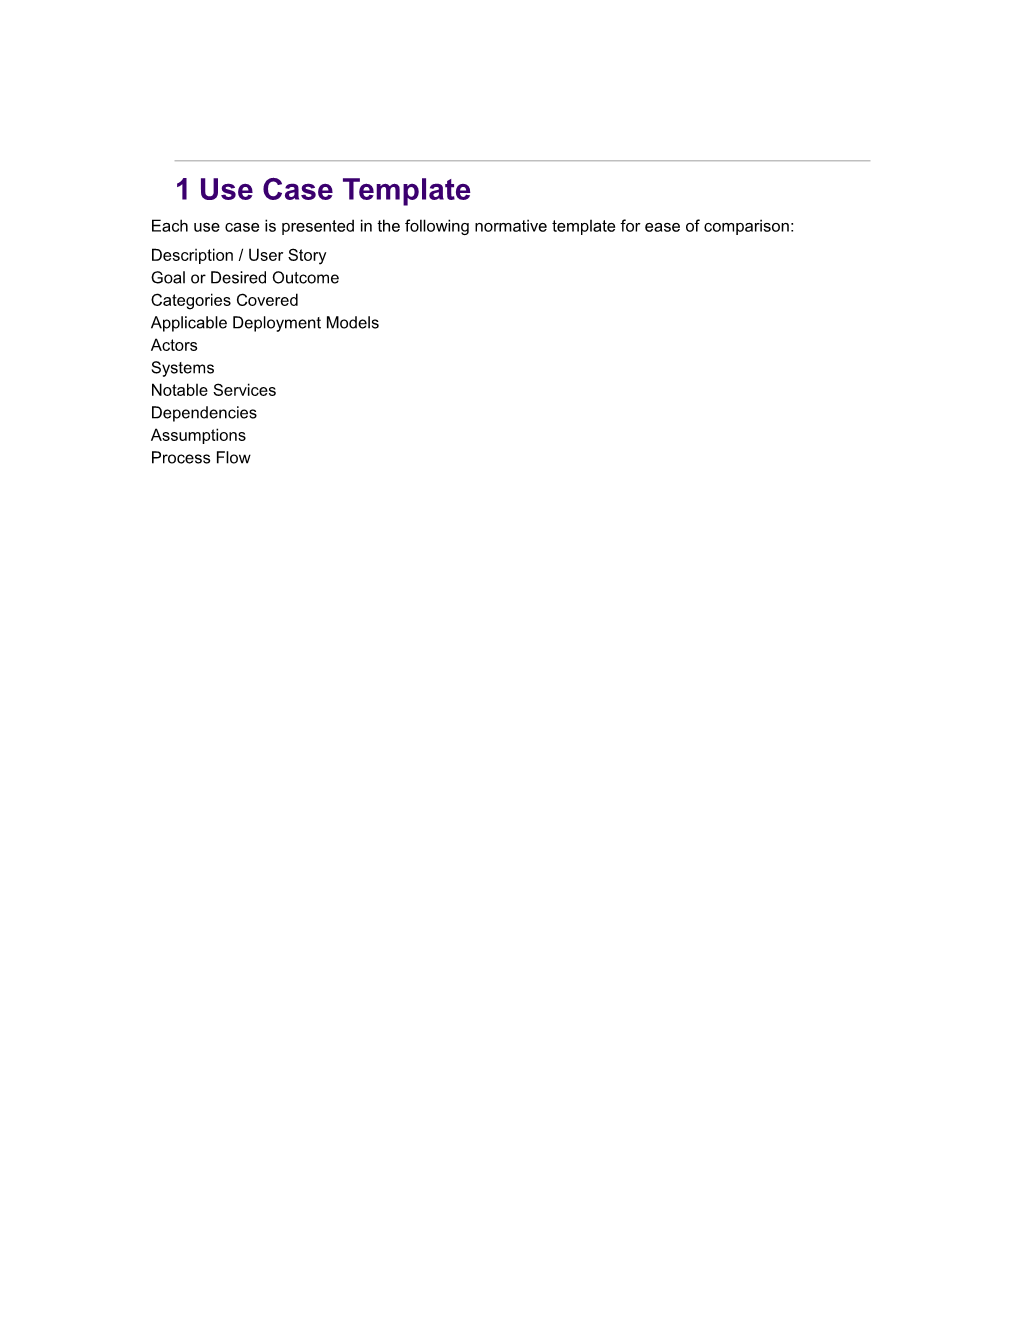 Each Use Case Is Presented in the Following Normative Template for Ease of Comparison